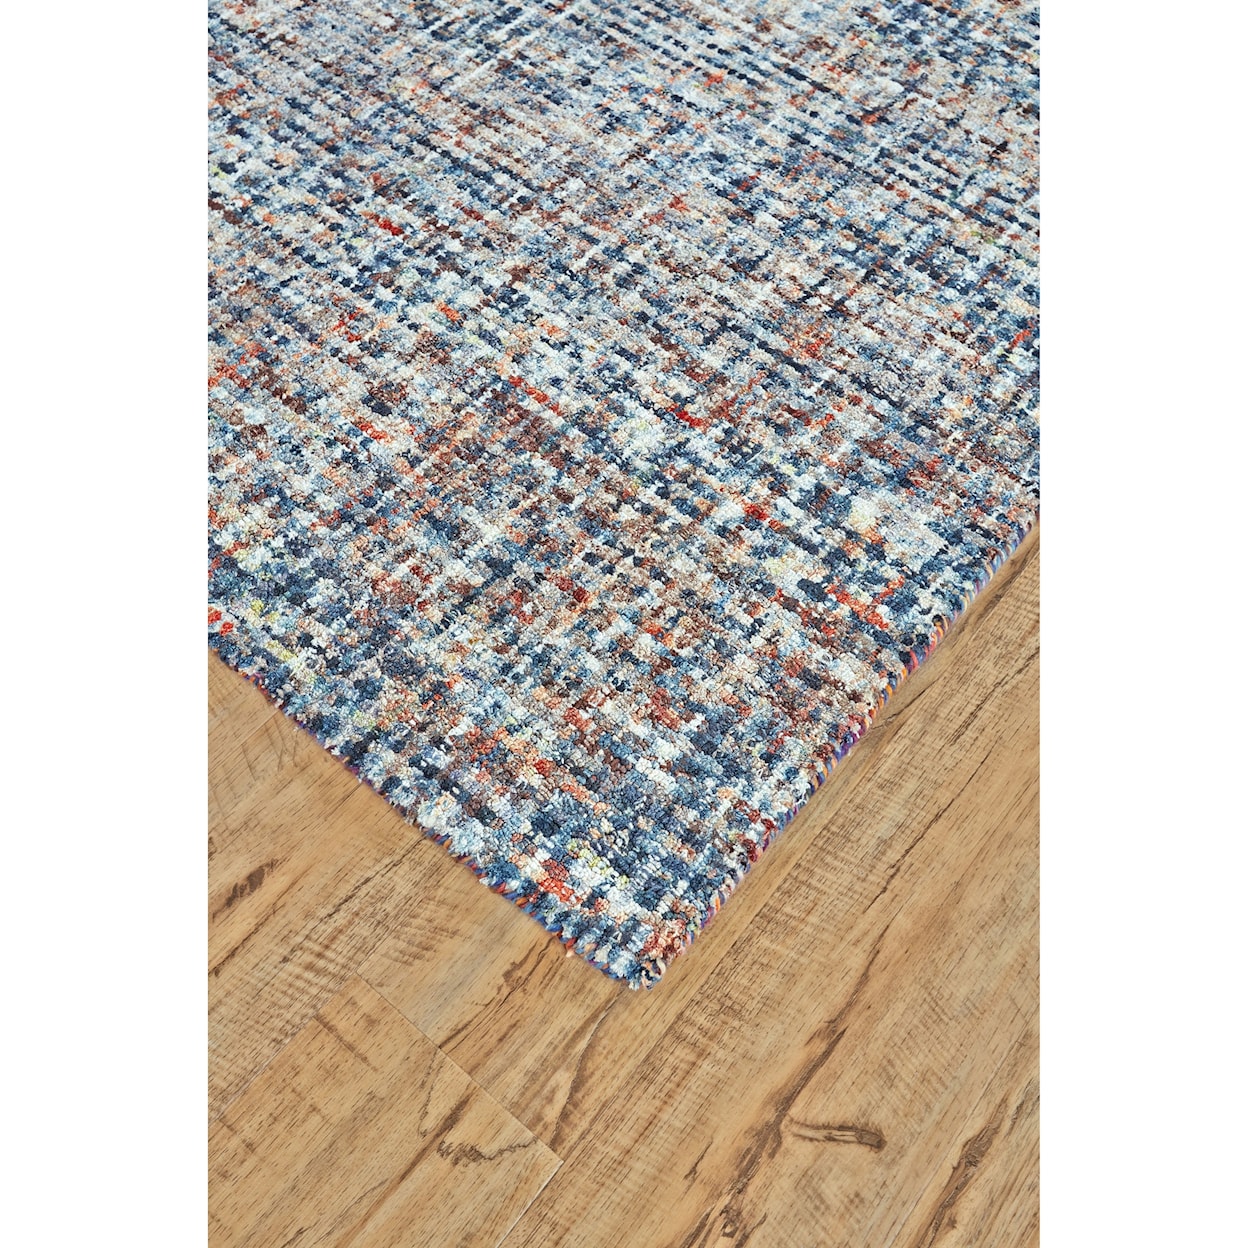 Feizy Rugs St. Germaine Amour 9'-6" x 13'-6" Area Rug